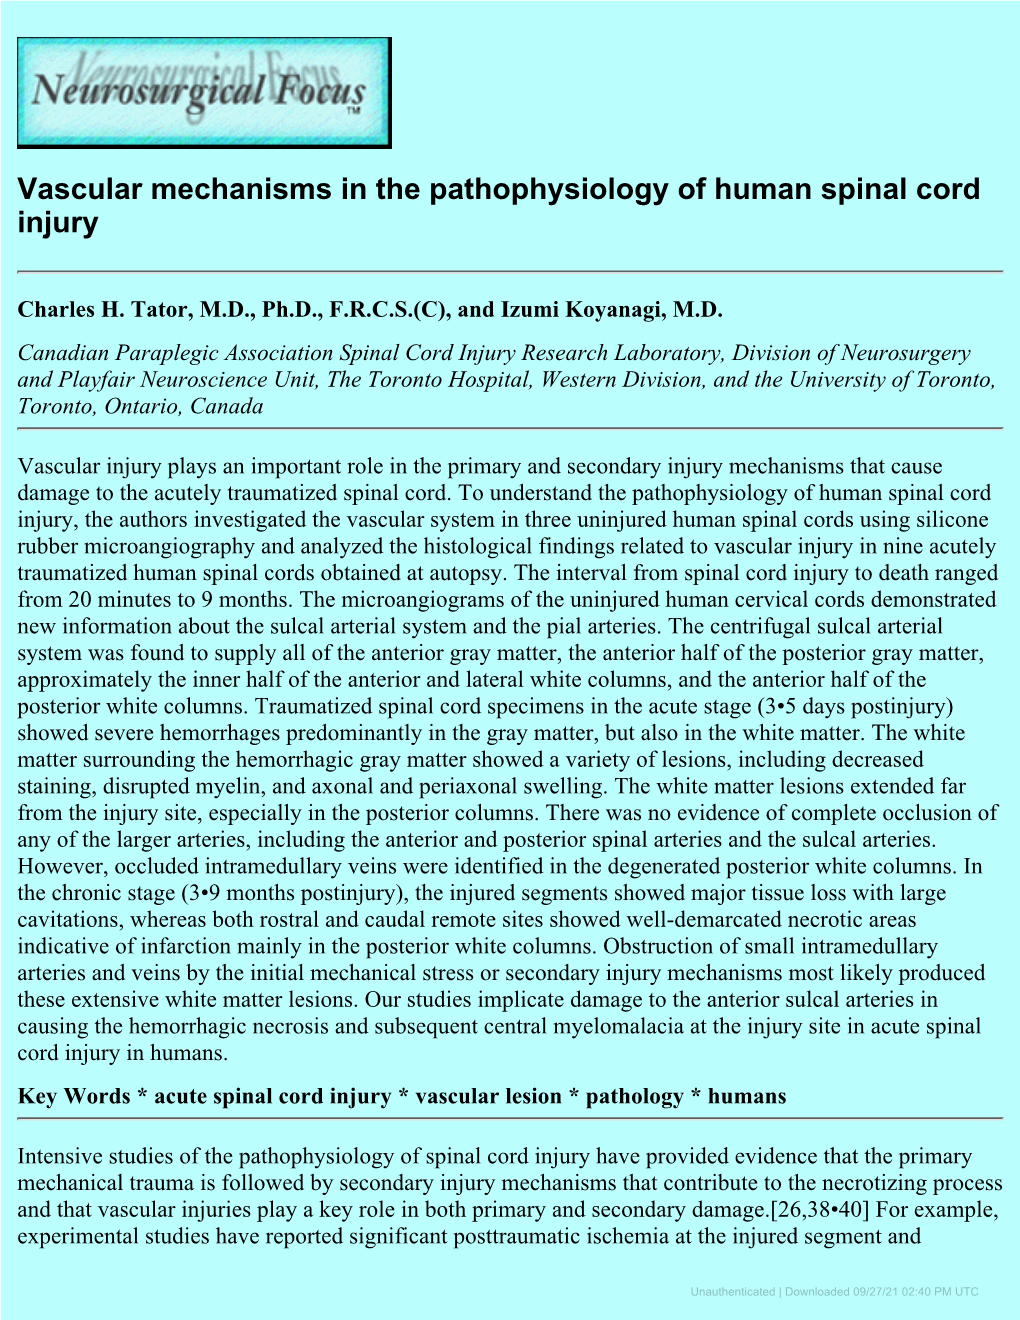 Vascular Mechanisms in the Pathophysiology of Human Spinal Cord Injury